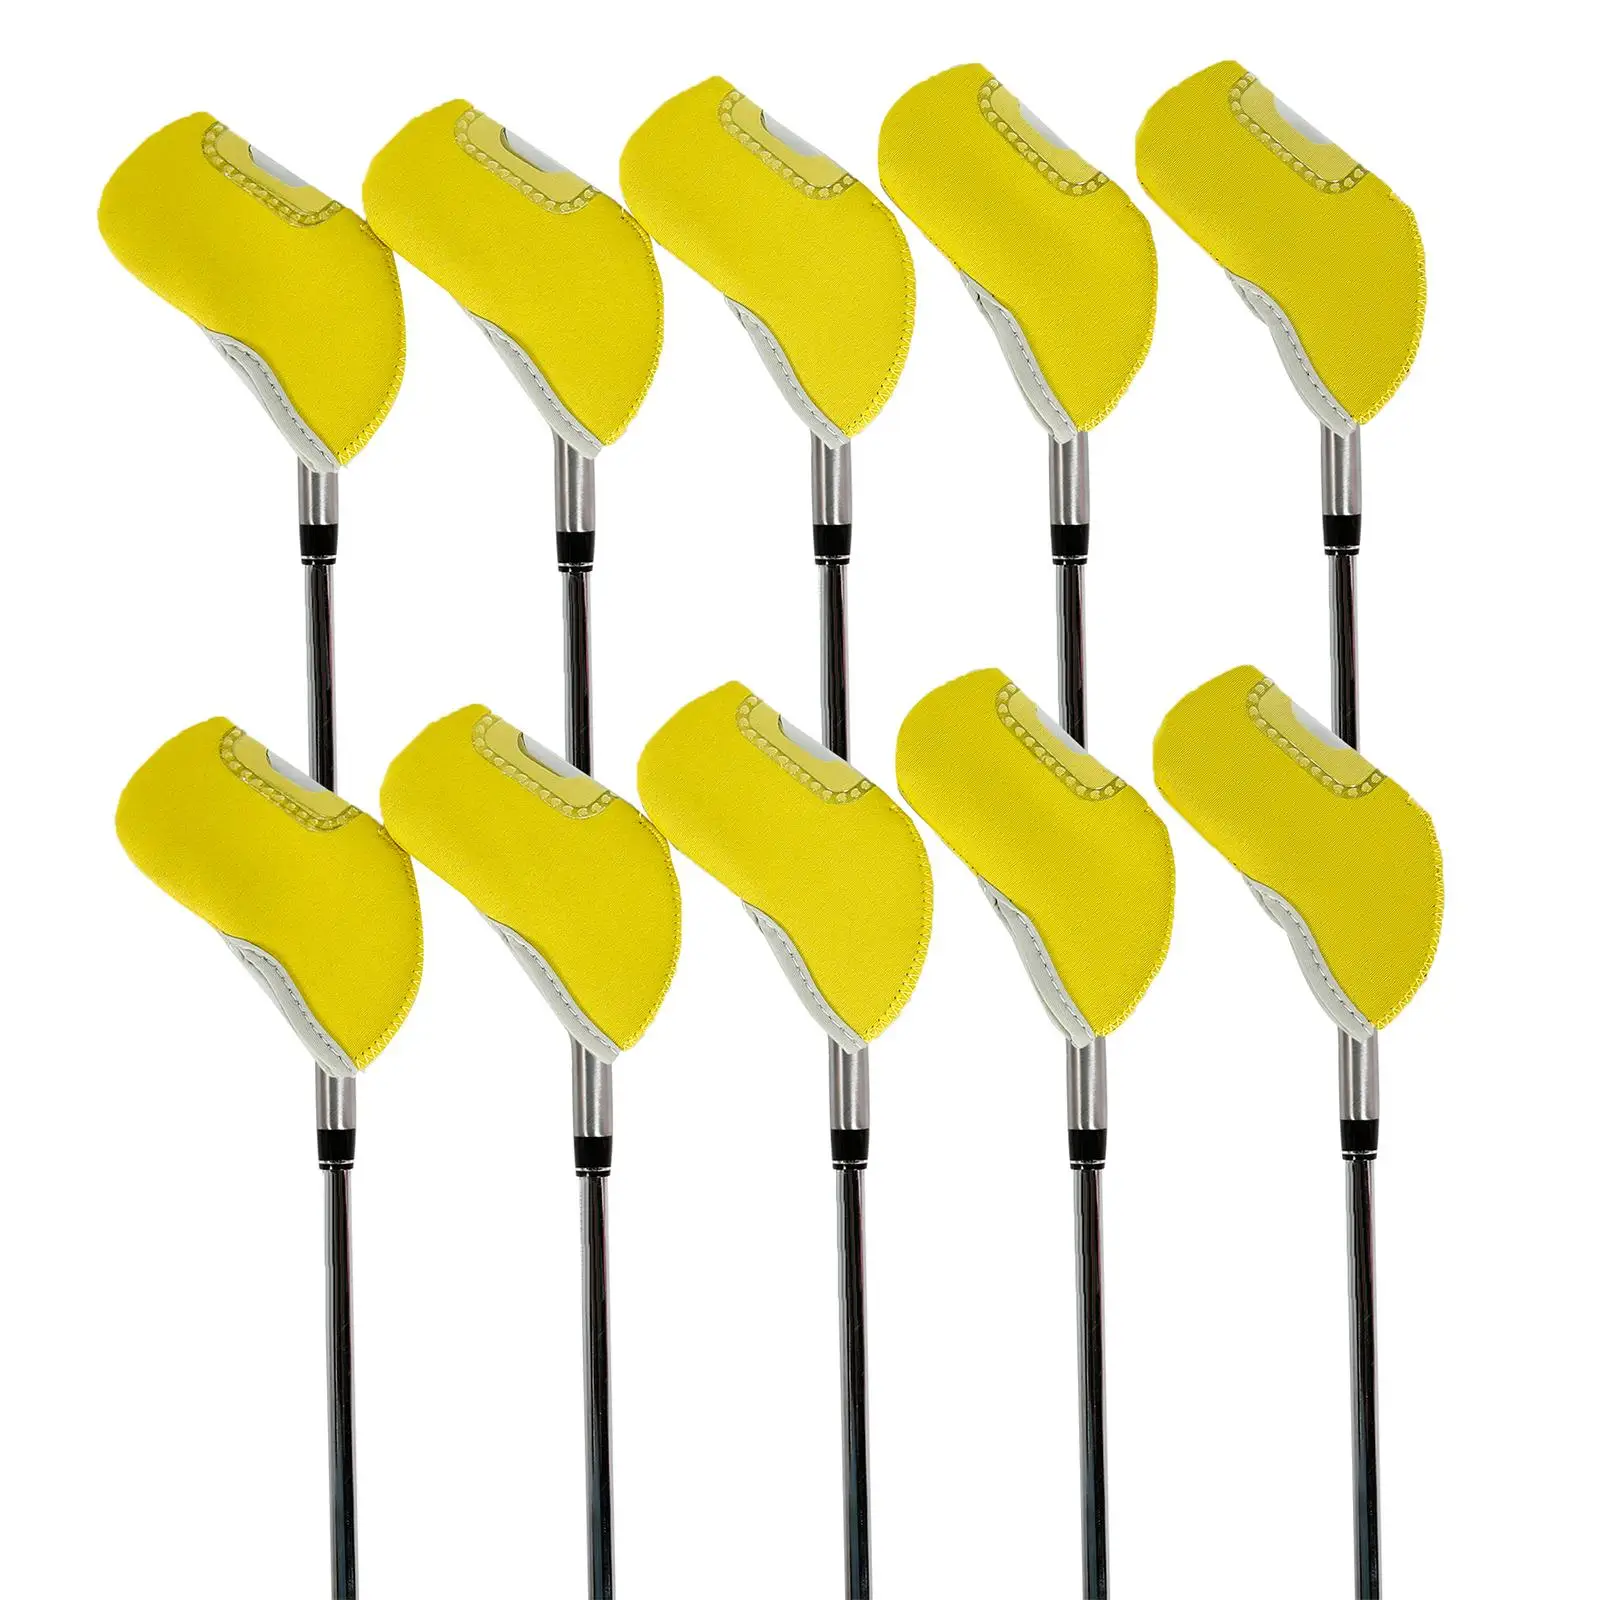 

10x Golf Iron Covers Set Golf Club Protectors Travel for Golf Clubs Irons Wedges Golf Club Head Covers